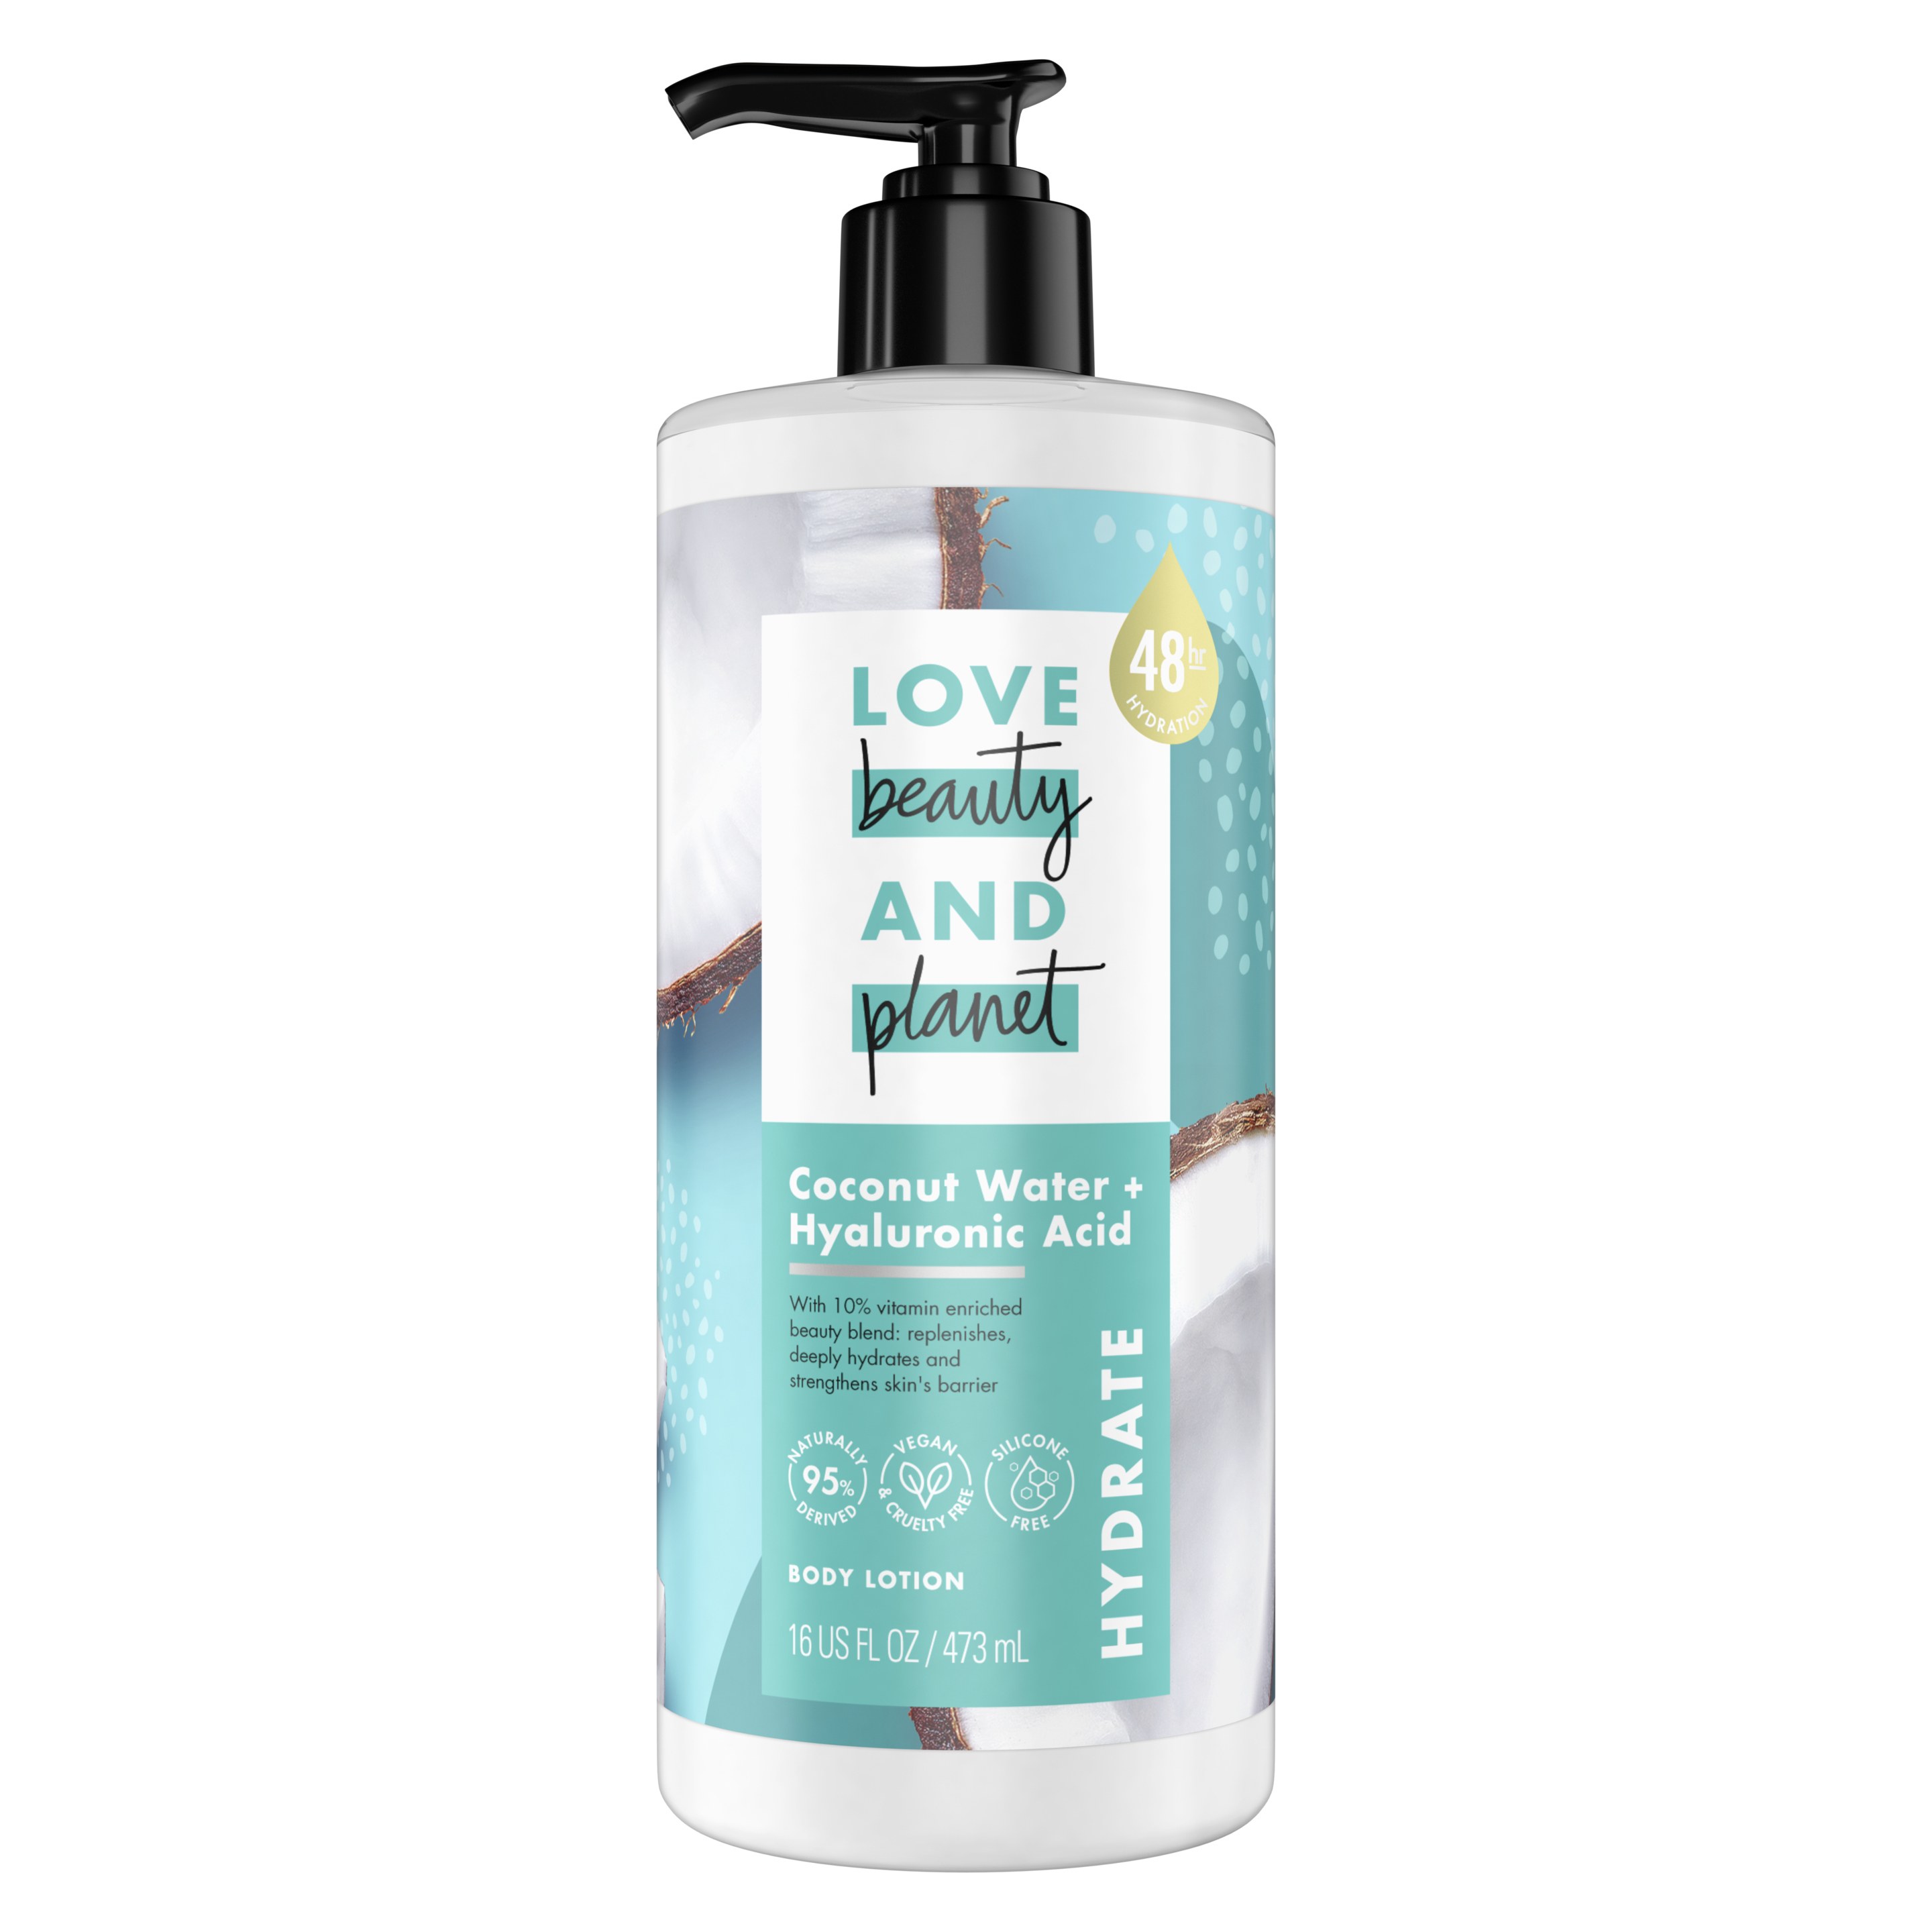 coconut water + hyaluronic body lotion